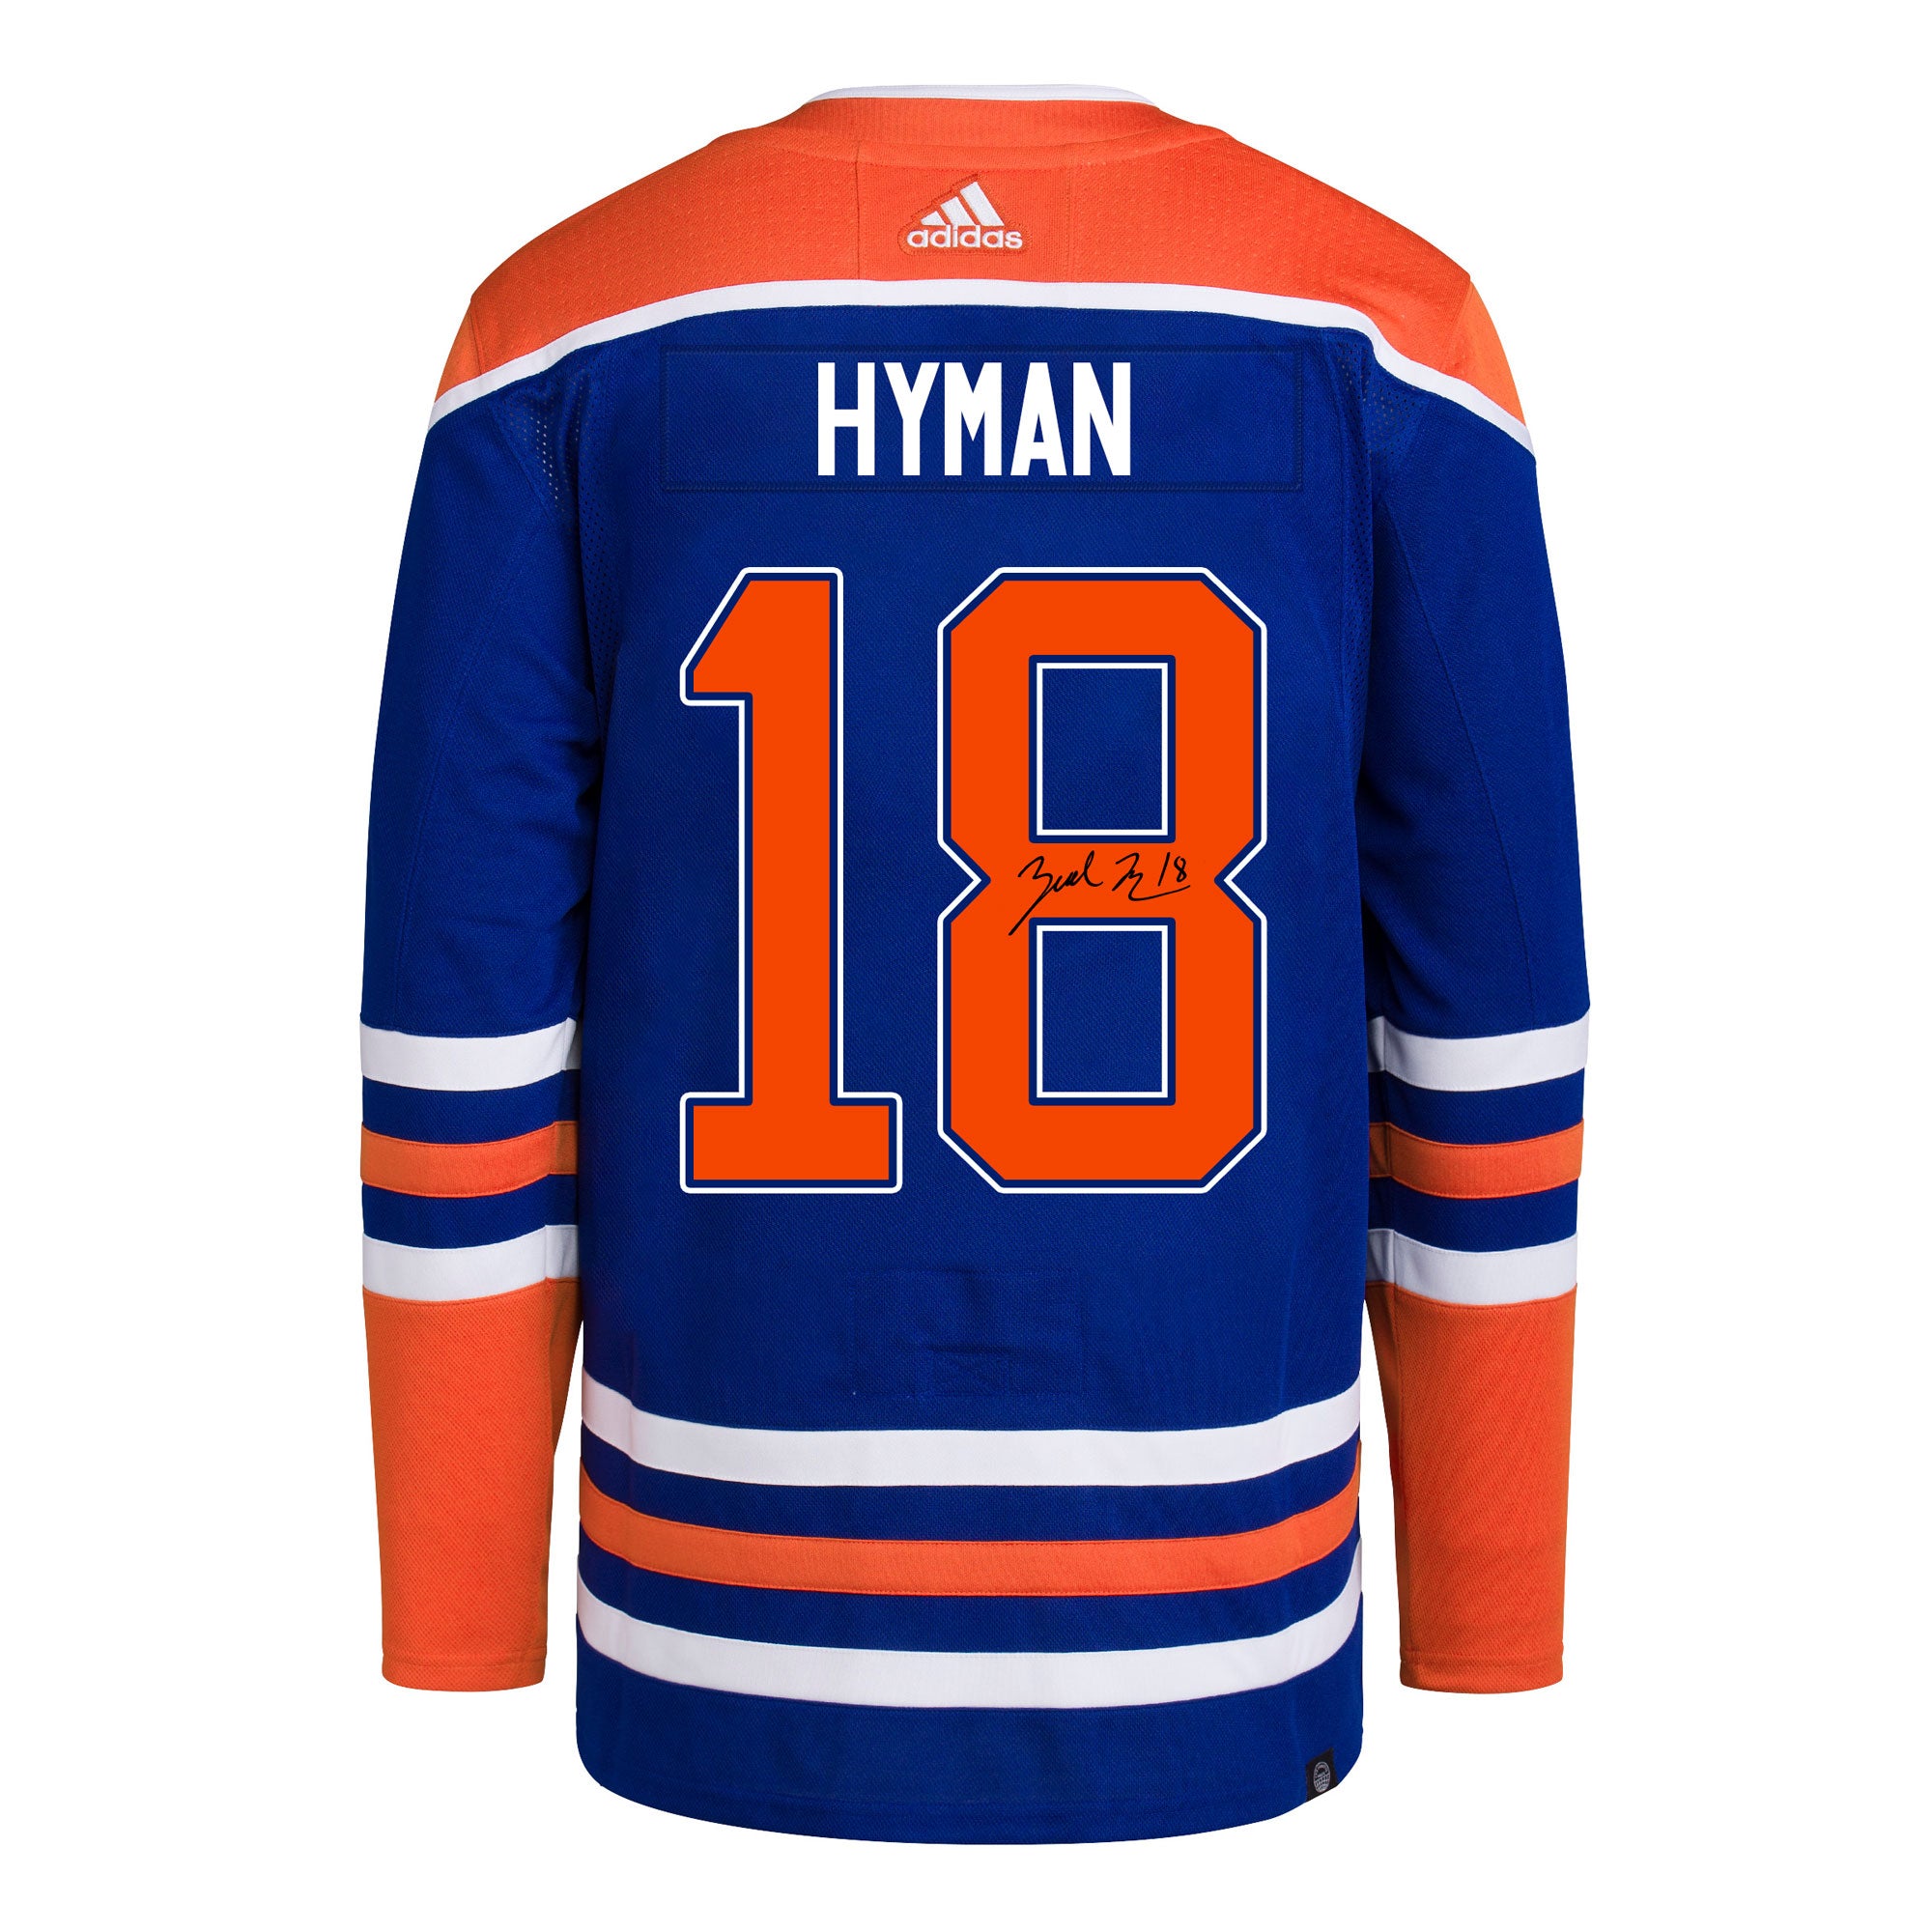 Zach Hyman #18 - Autographed 2022-23 Edmonton Oilers Pre-game Warm-Up Worn  Hockey Fights Cancer Jersey - NHL Auctions